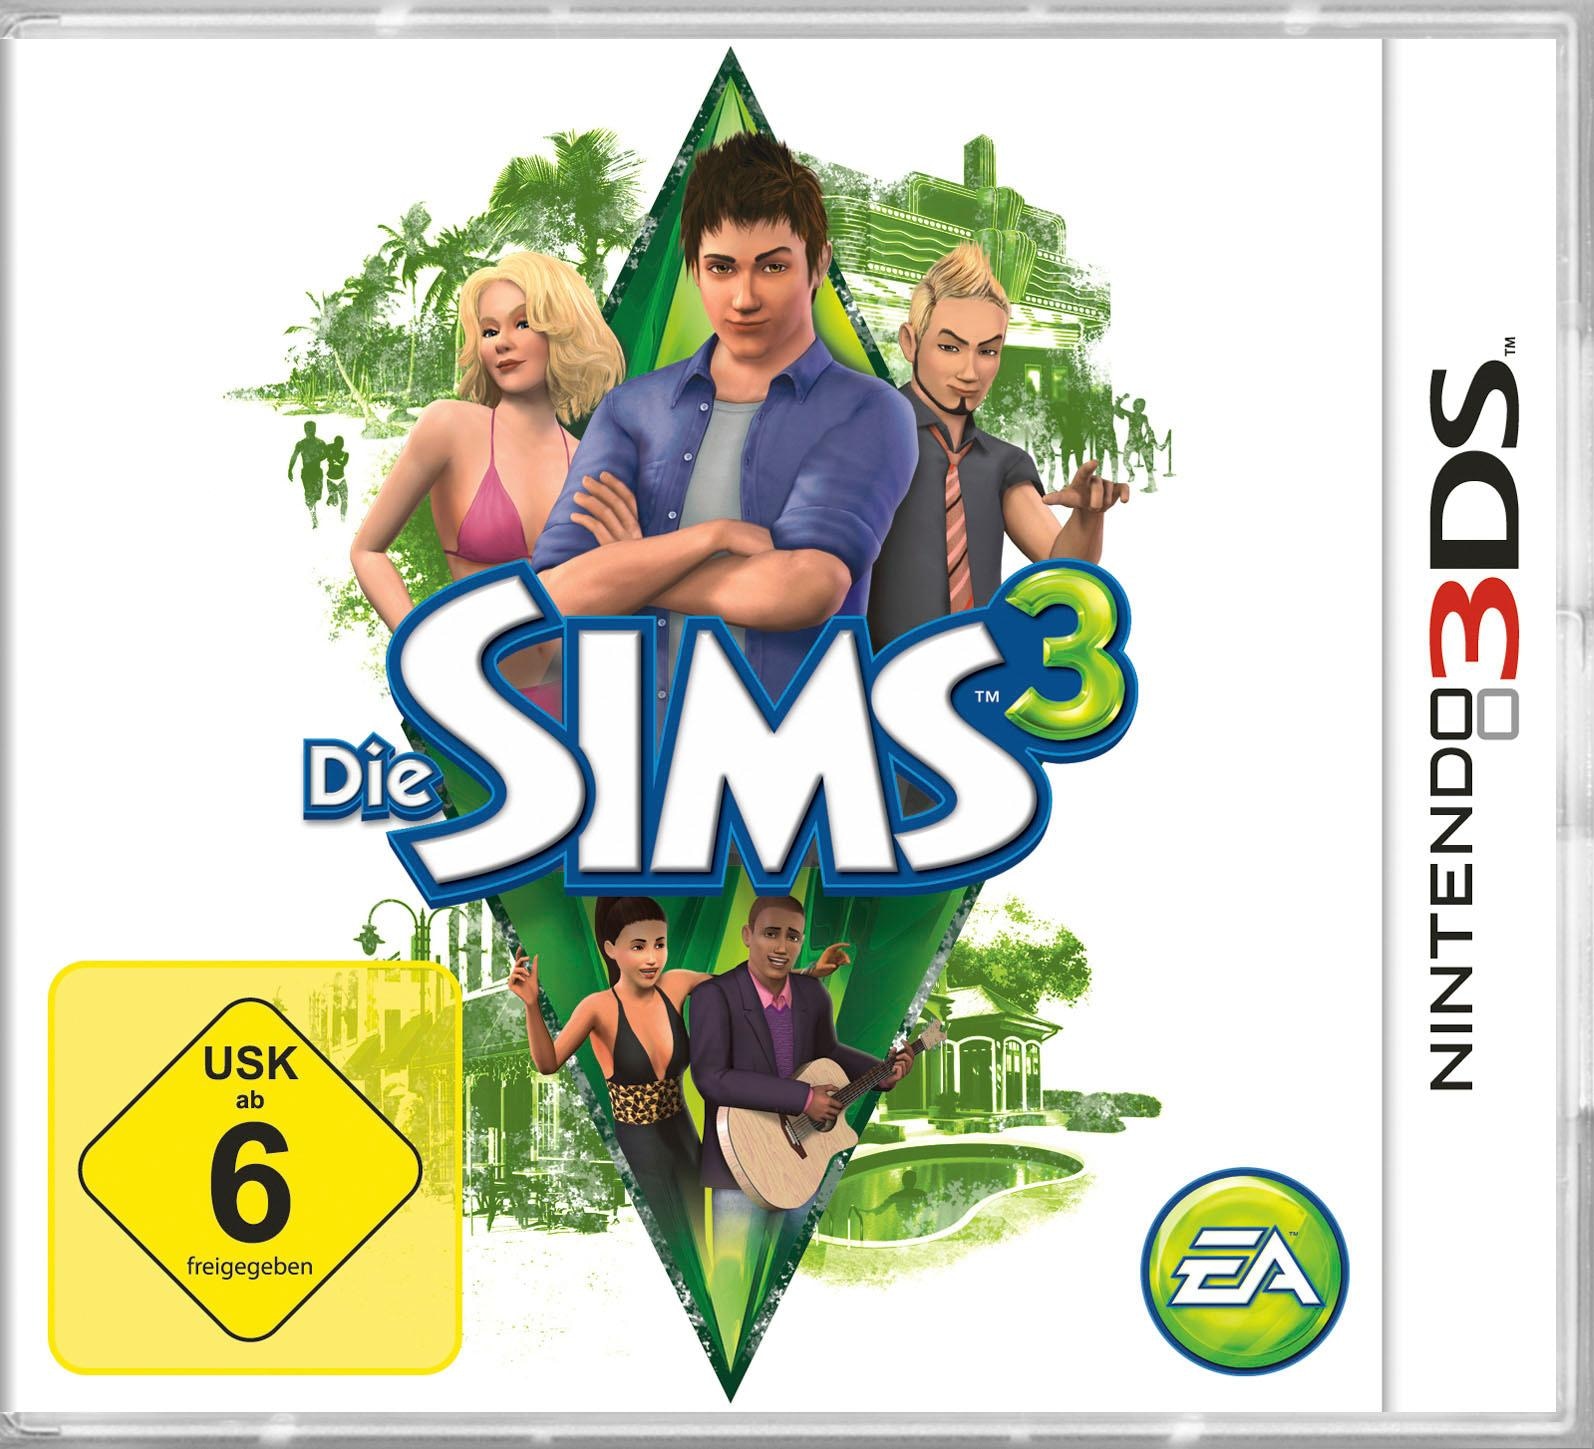 Electronic Arts Spielesoftware »Die Sims 3«, Nintendo 3DS, Software Pyramide